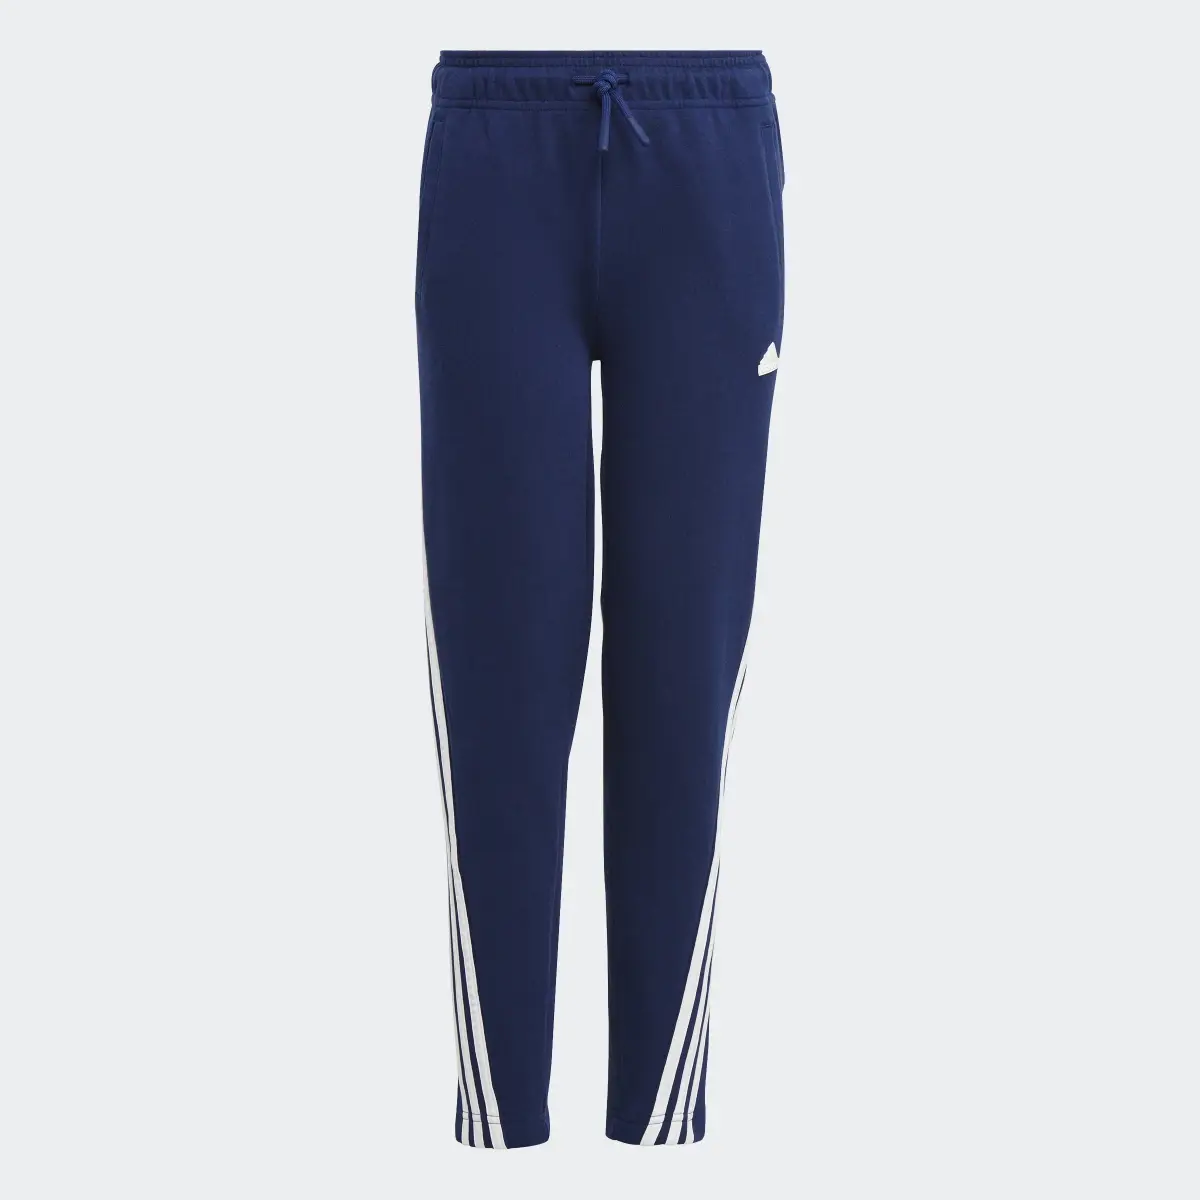 Adidas Future Icons 3-Stripes Ankle-Length Joggers. 3